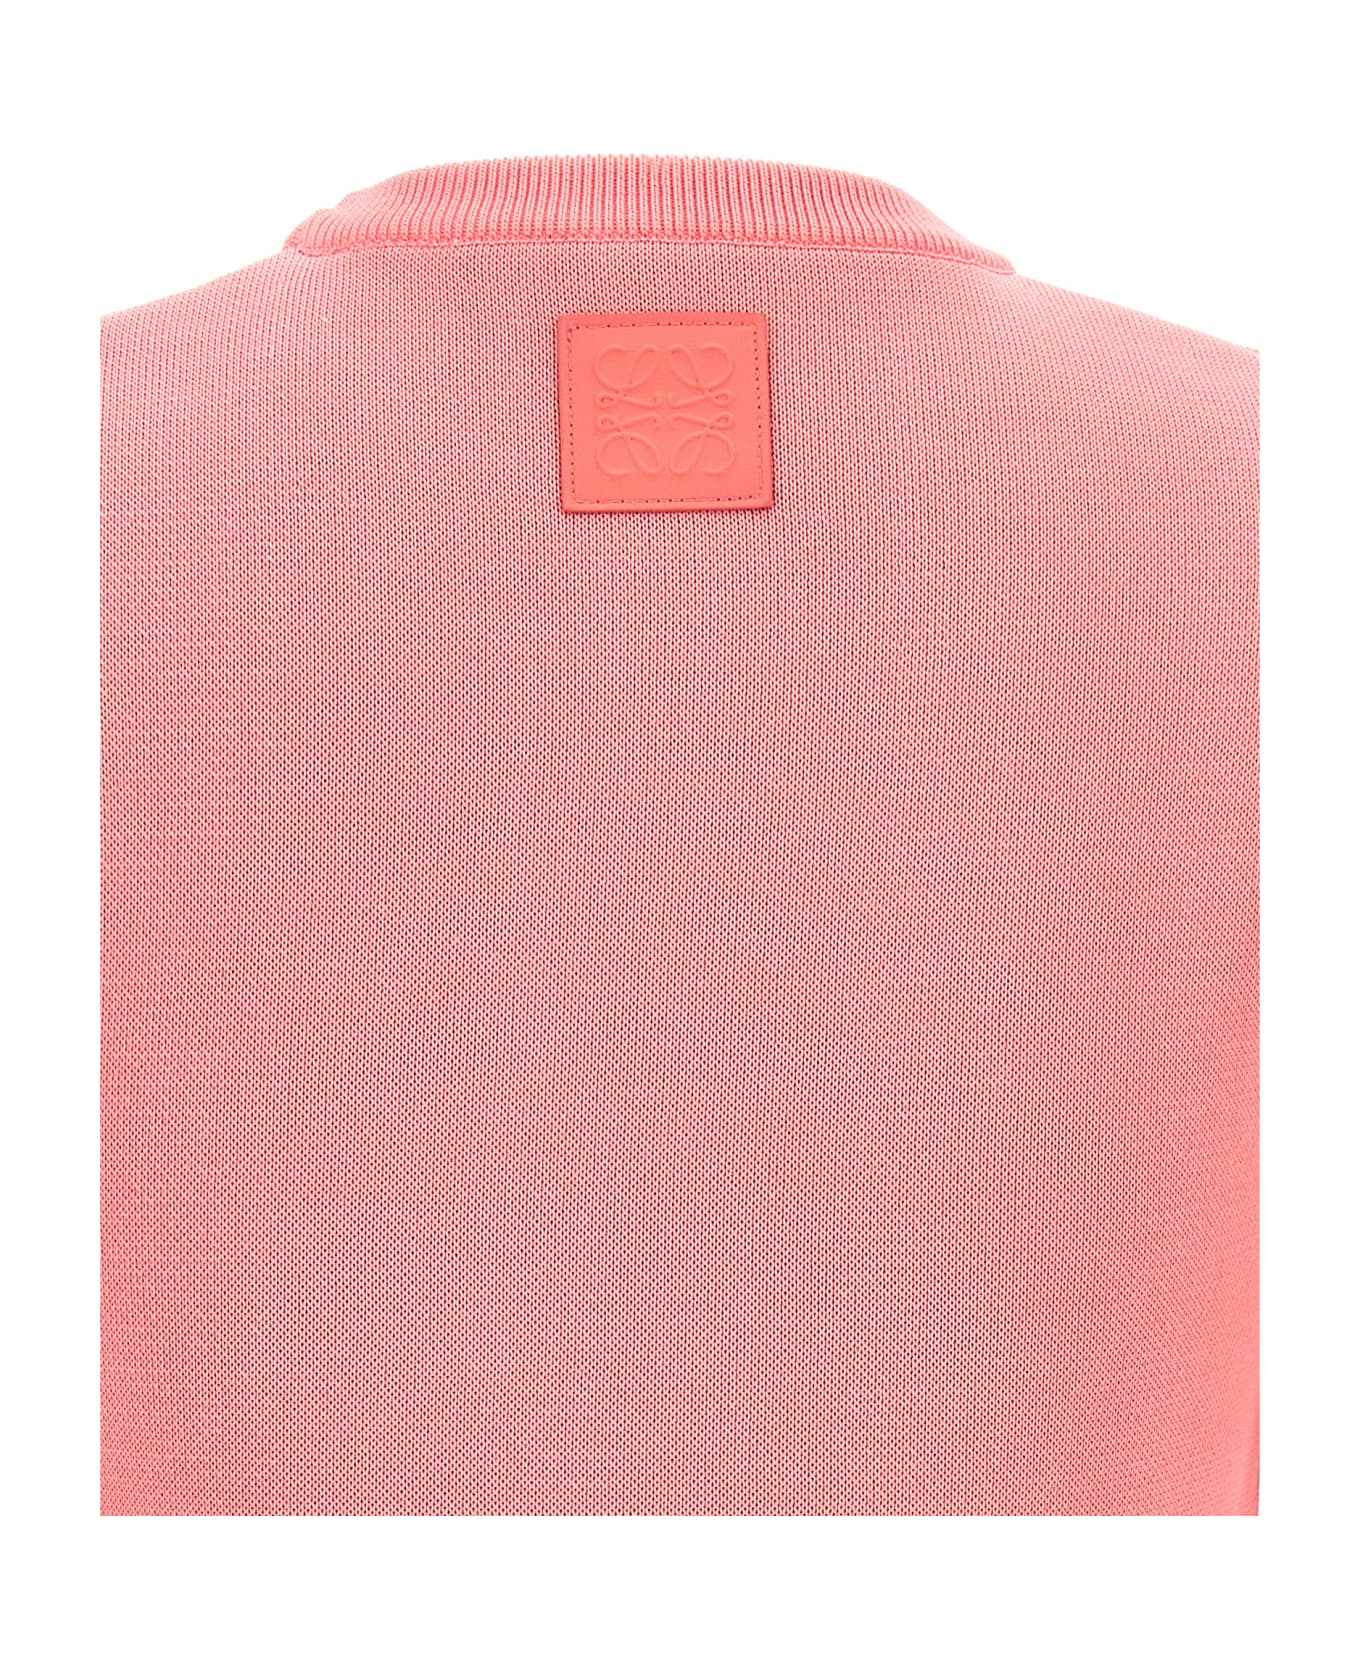 Loewe 'reproportioned' Cropped Top - Pink トップス